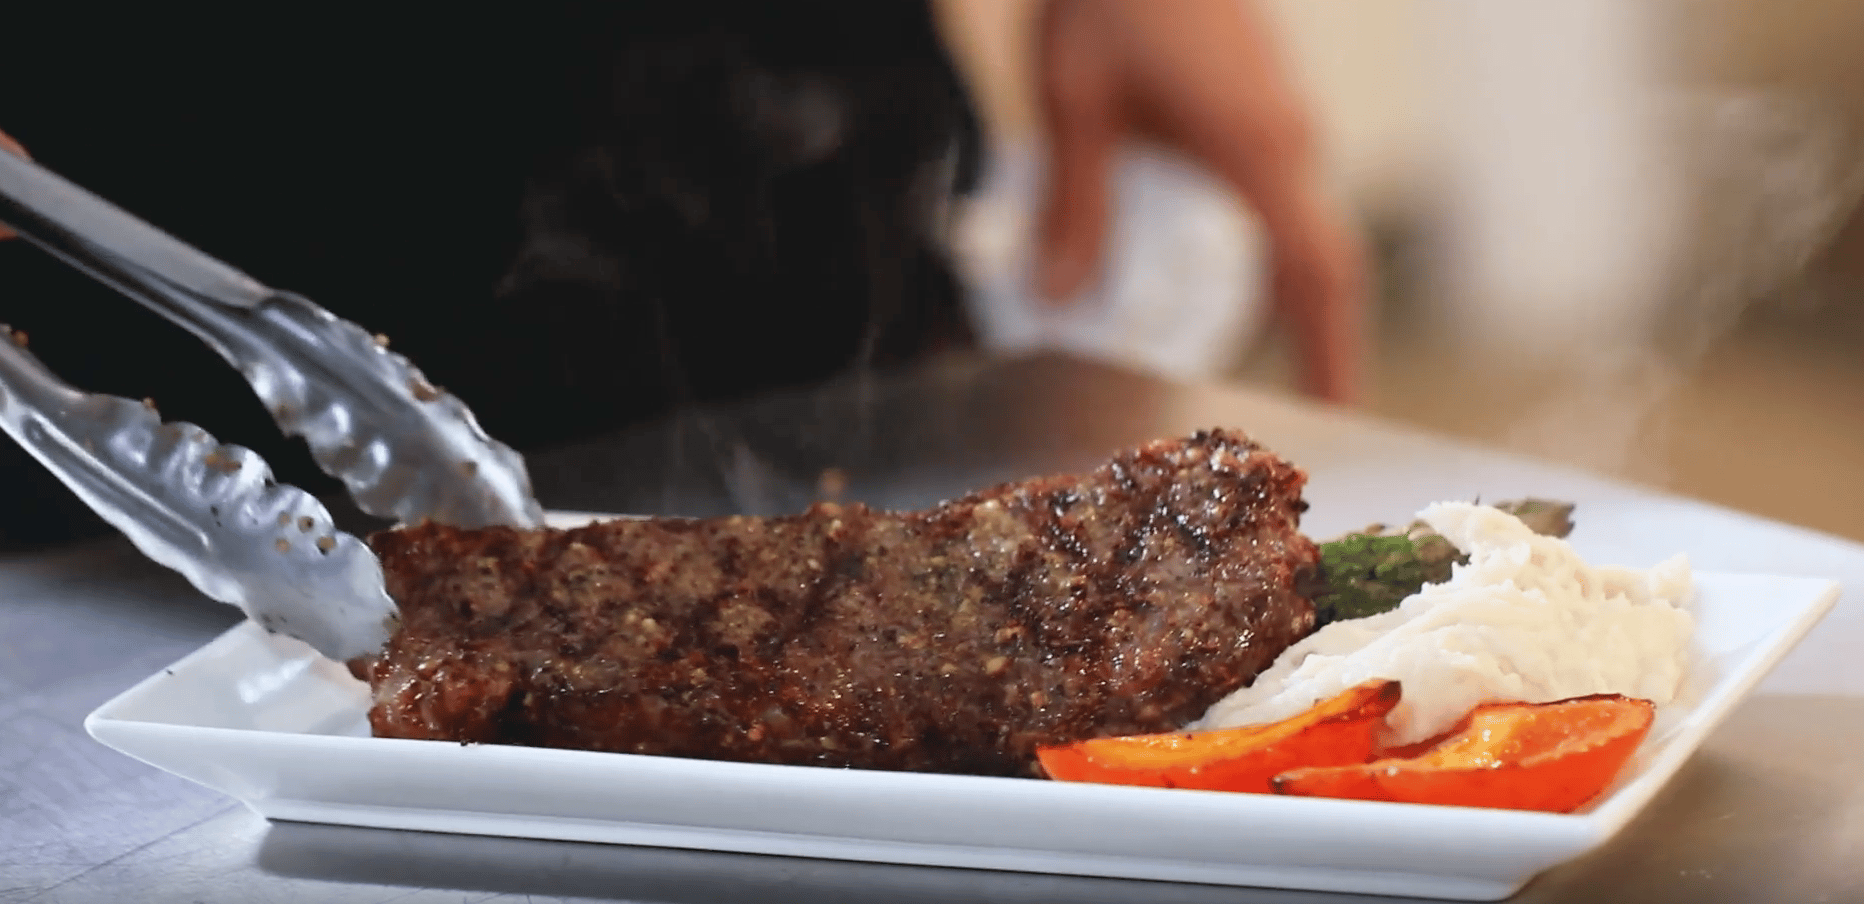 Cooking with Henny Penny Flex Combi: Steak